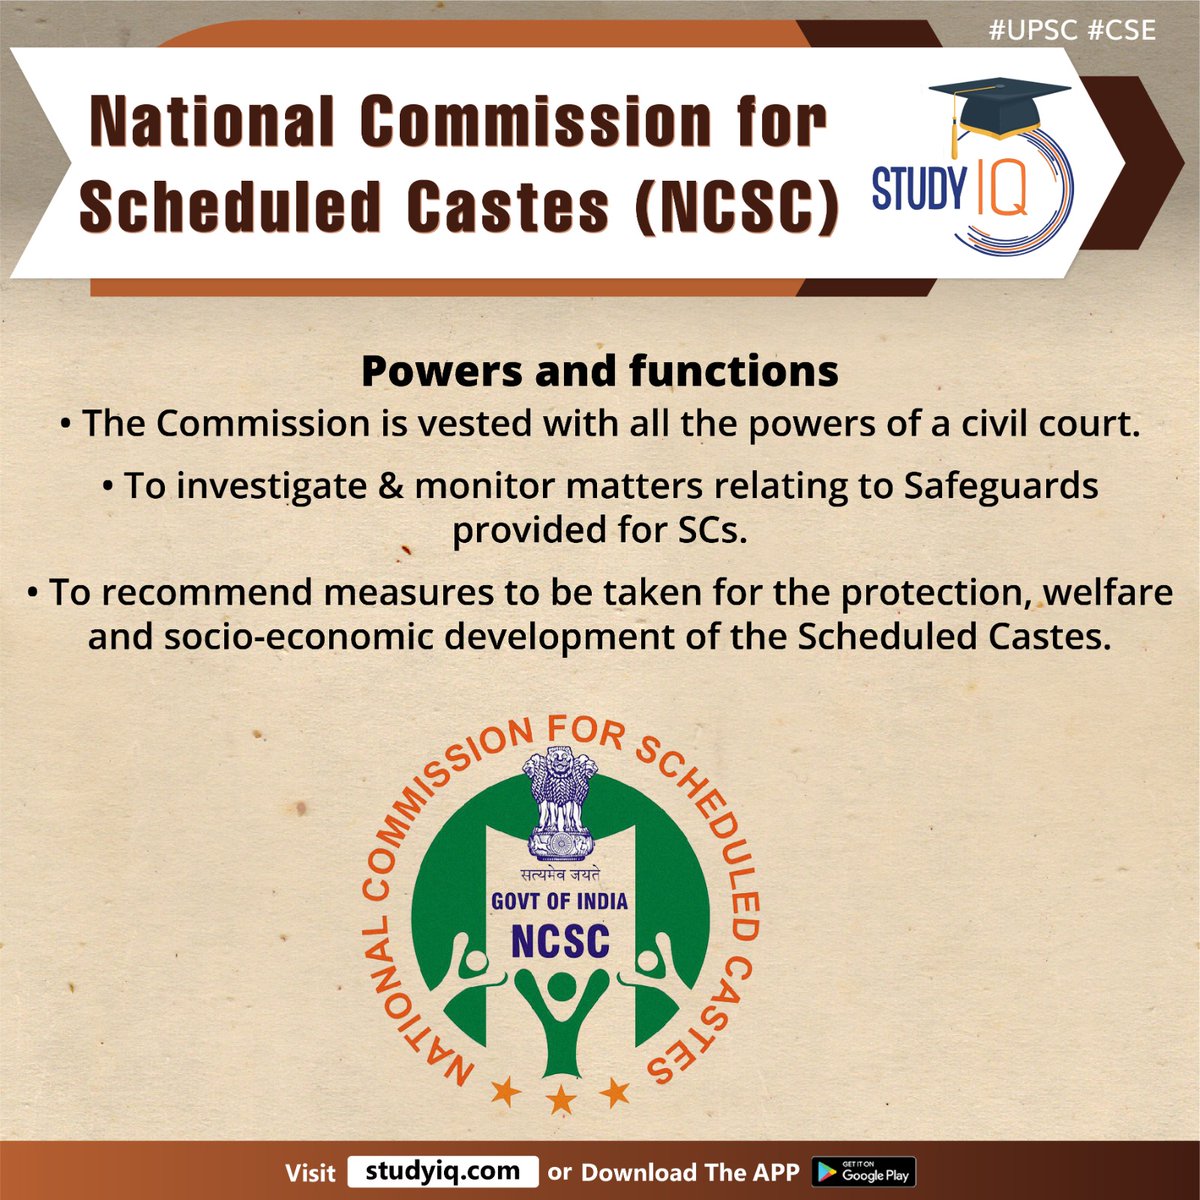 National Commission for Scheduled Castes (NCSC)

#nationalcommissionforscheduledcastes #ncsc #scheduledcastes #fooddeliverycompany #dalitcommunity #unionministryofsocialjusticeandempowerment #article338 #constitutionofindia #st #amendmentact #socialeducation #economicinterests…